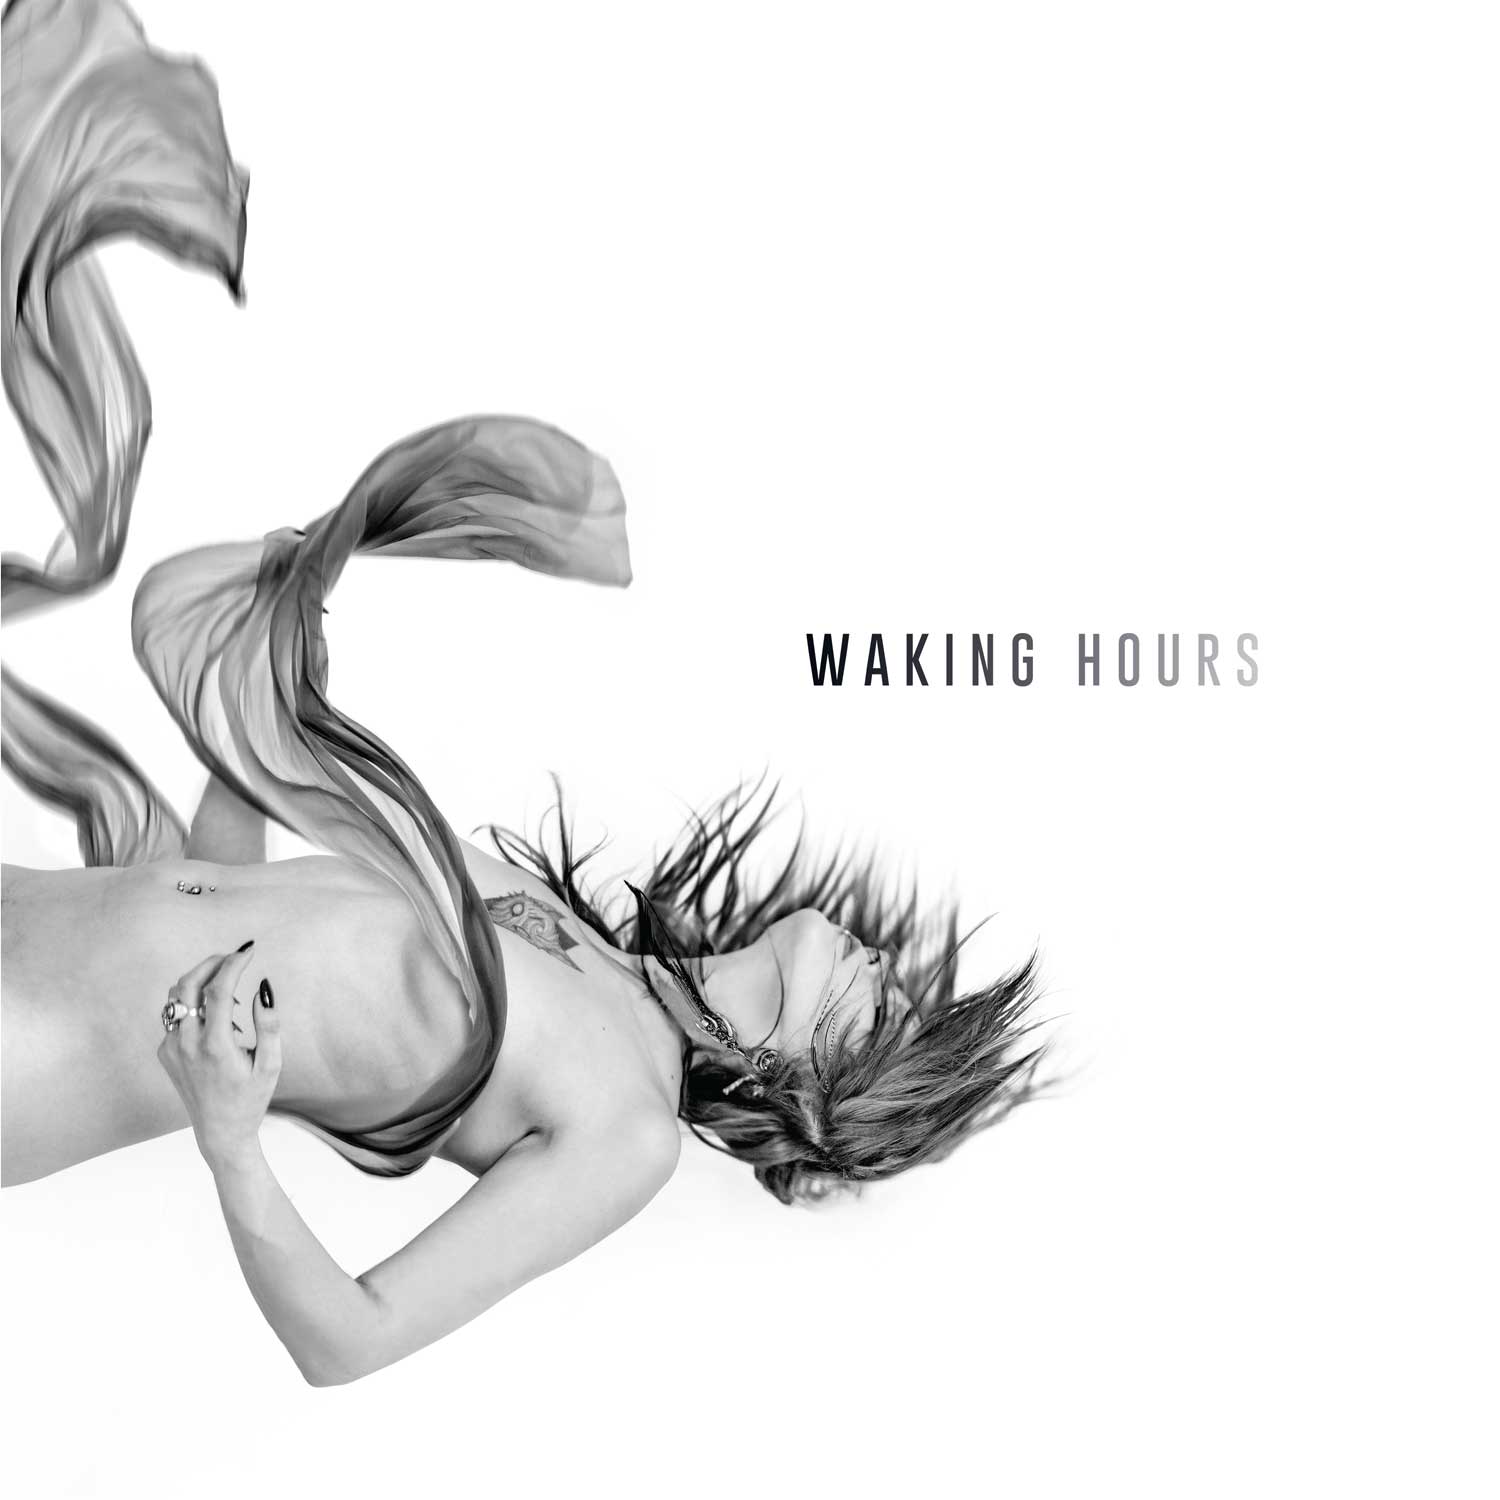 Waking Hours Out Now!